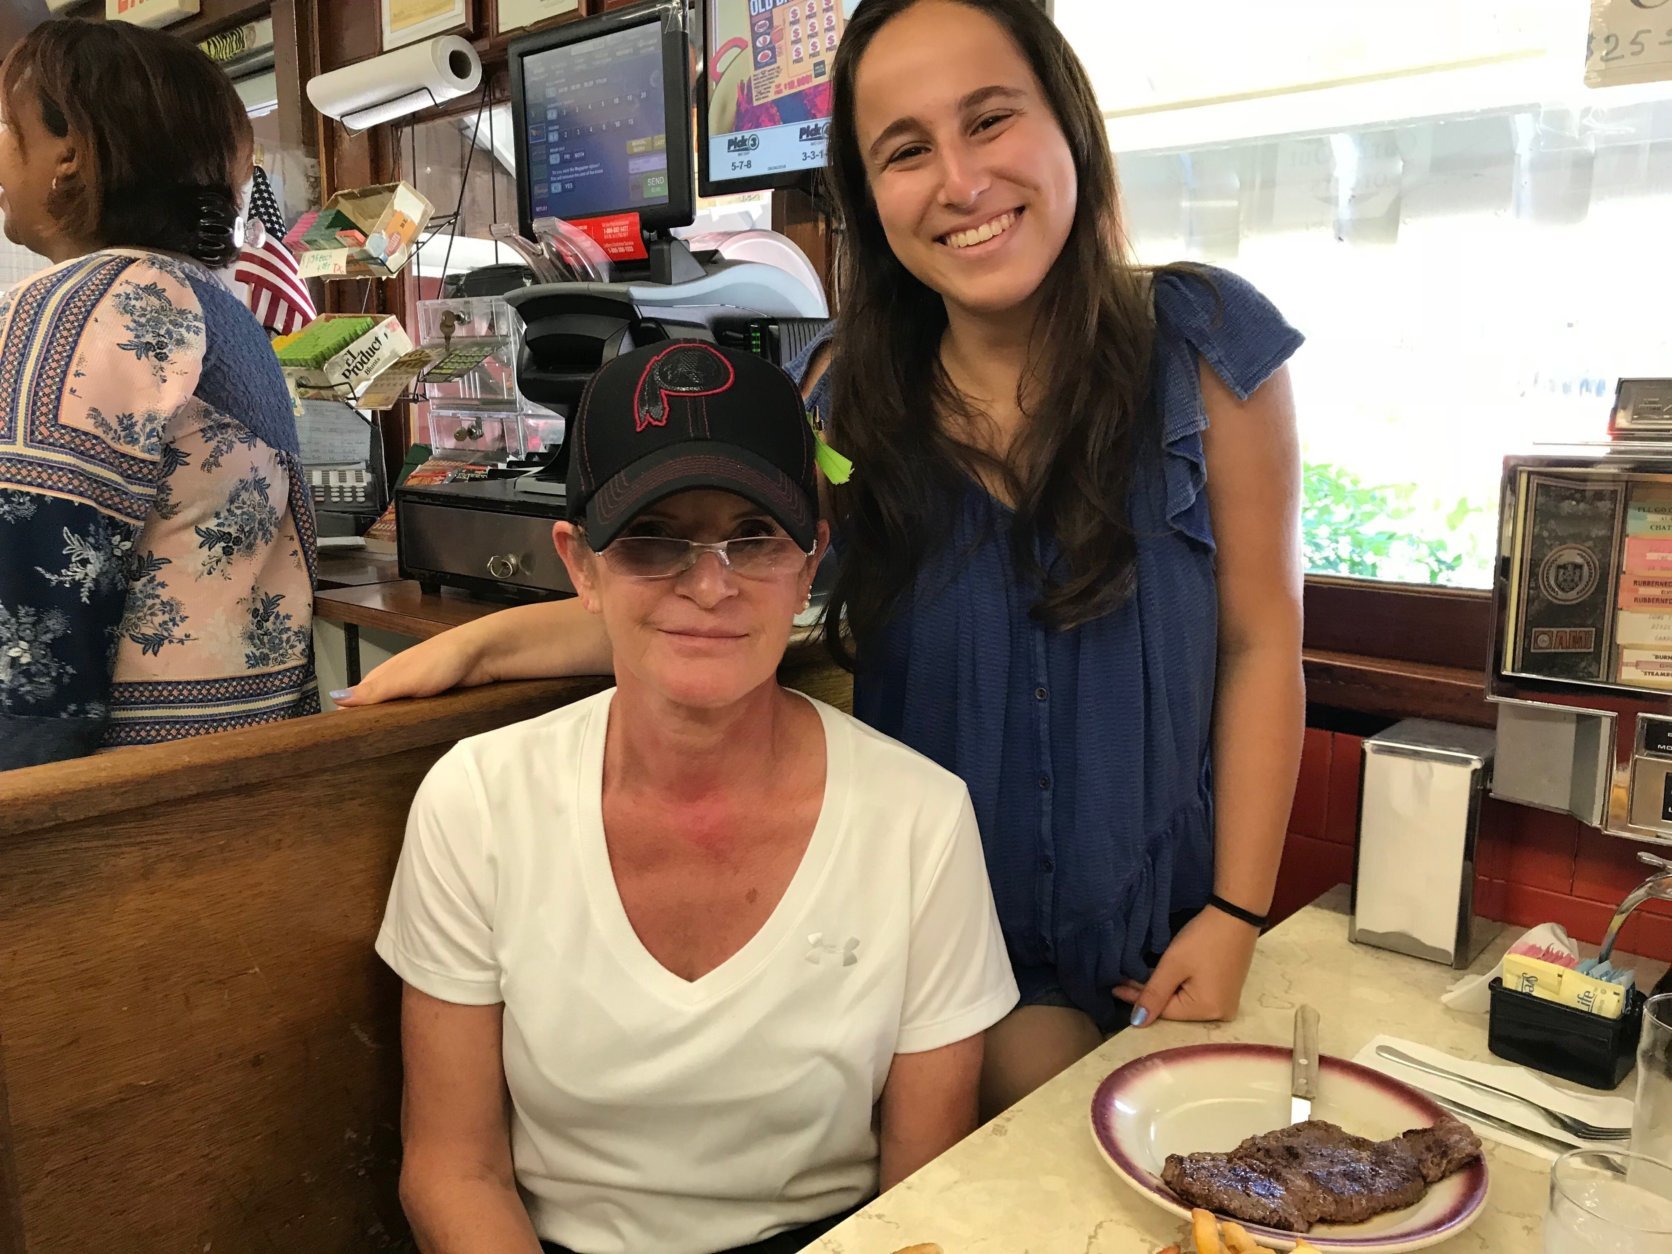 "My daughter's leaving for college tomorrow and it was essential that we come here for breakfast this morning," said Eileen Reid, of Rockville. "We love the diner, so anything that hurts their business greatly upsets me." (WTOP/Dick Uliano)